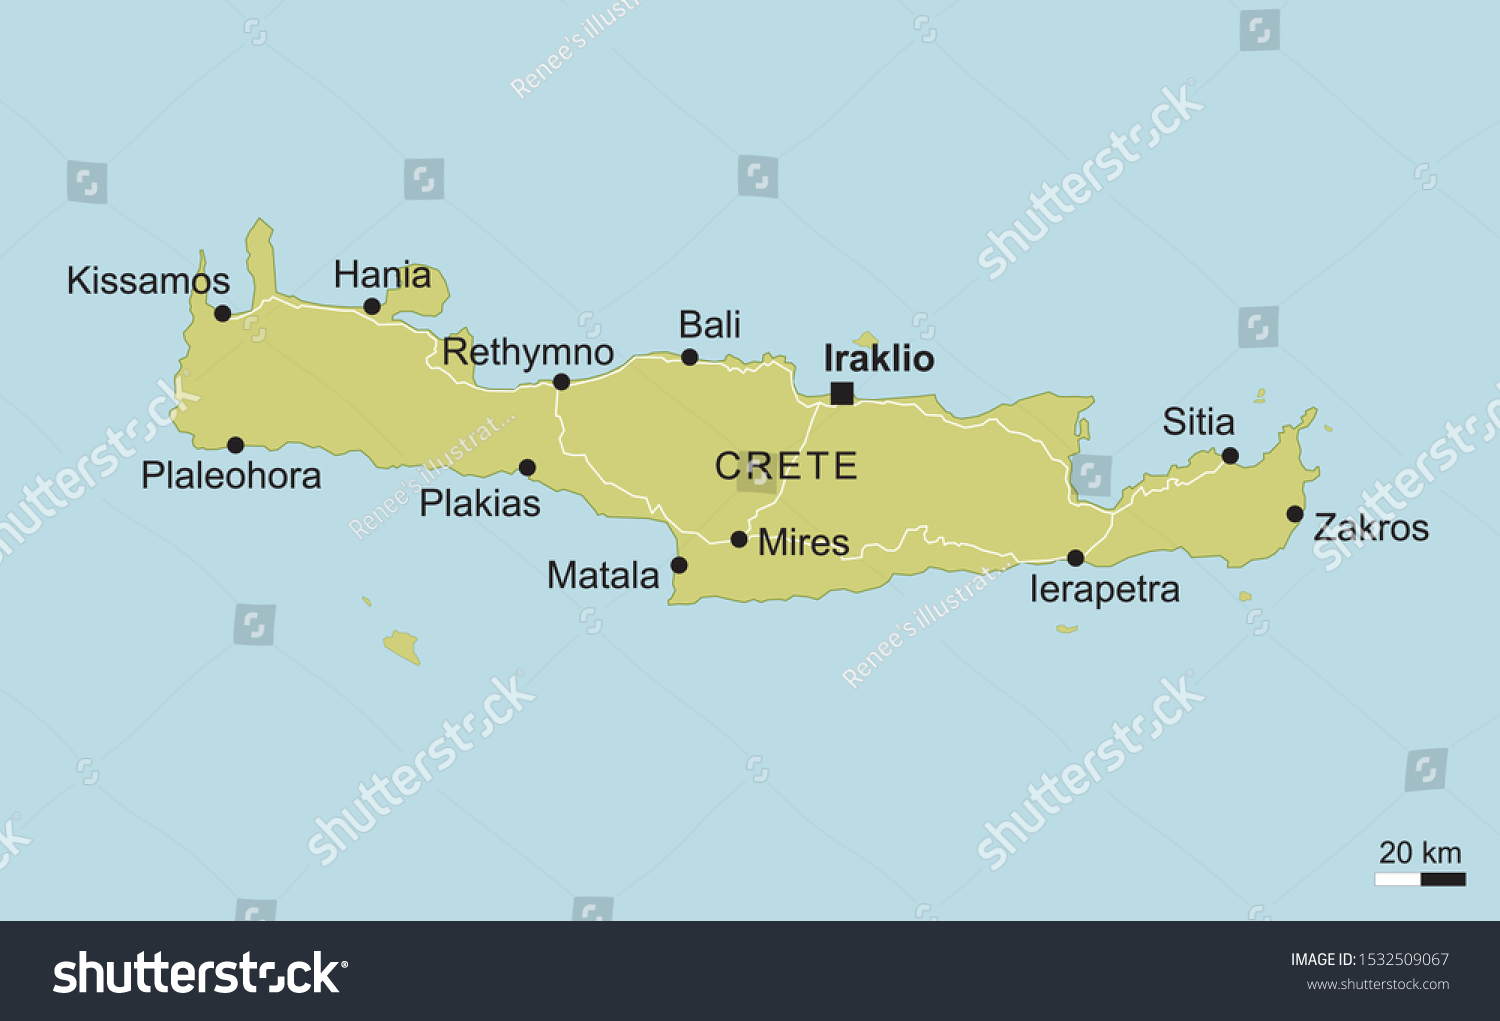 SVG of vector map of Crete with important cities and roads Greece island geography cartography svg